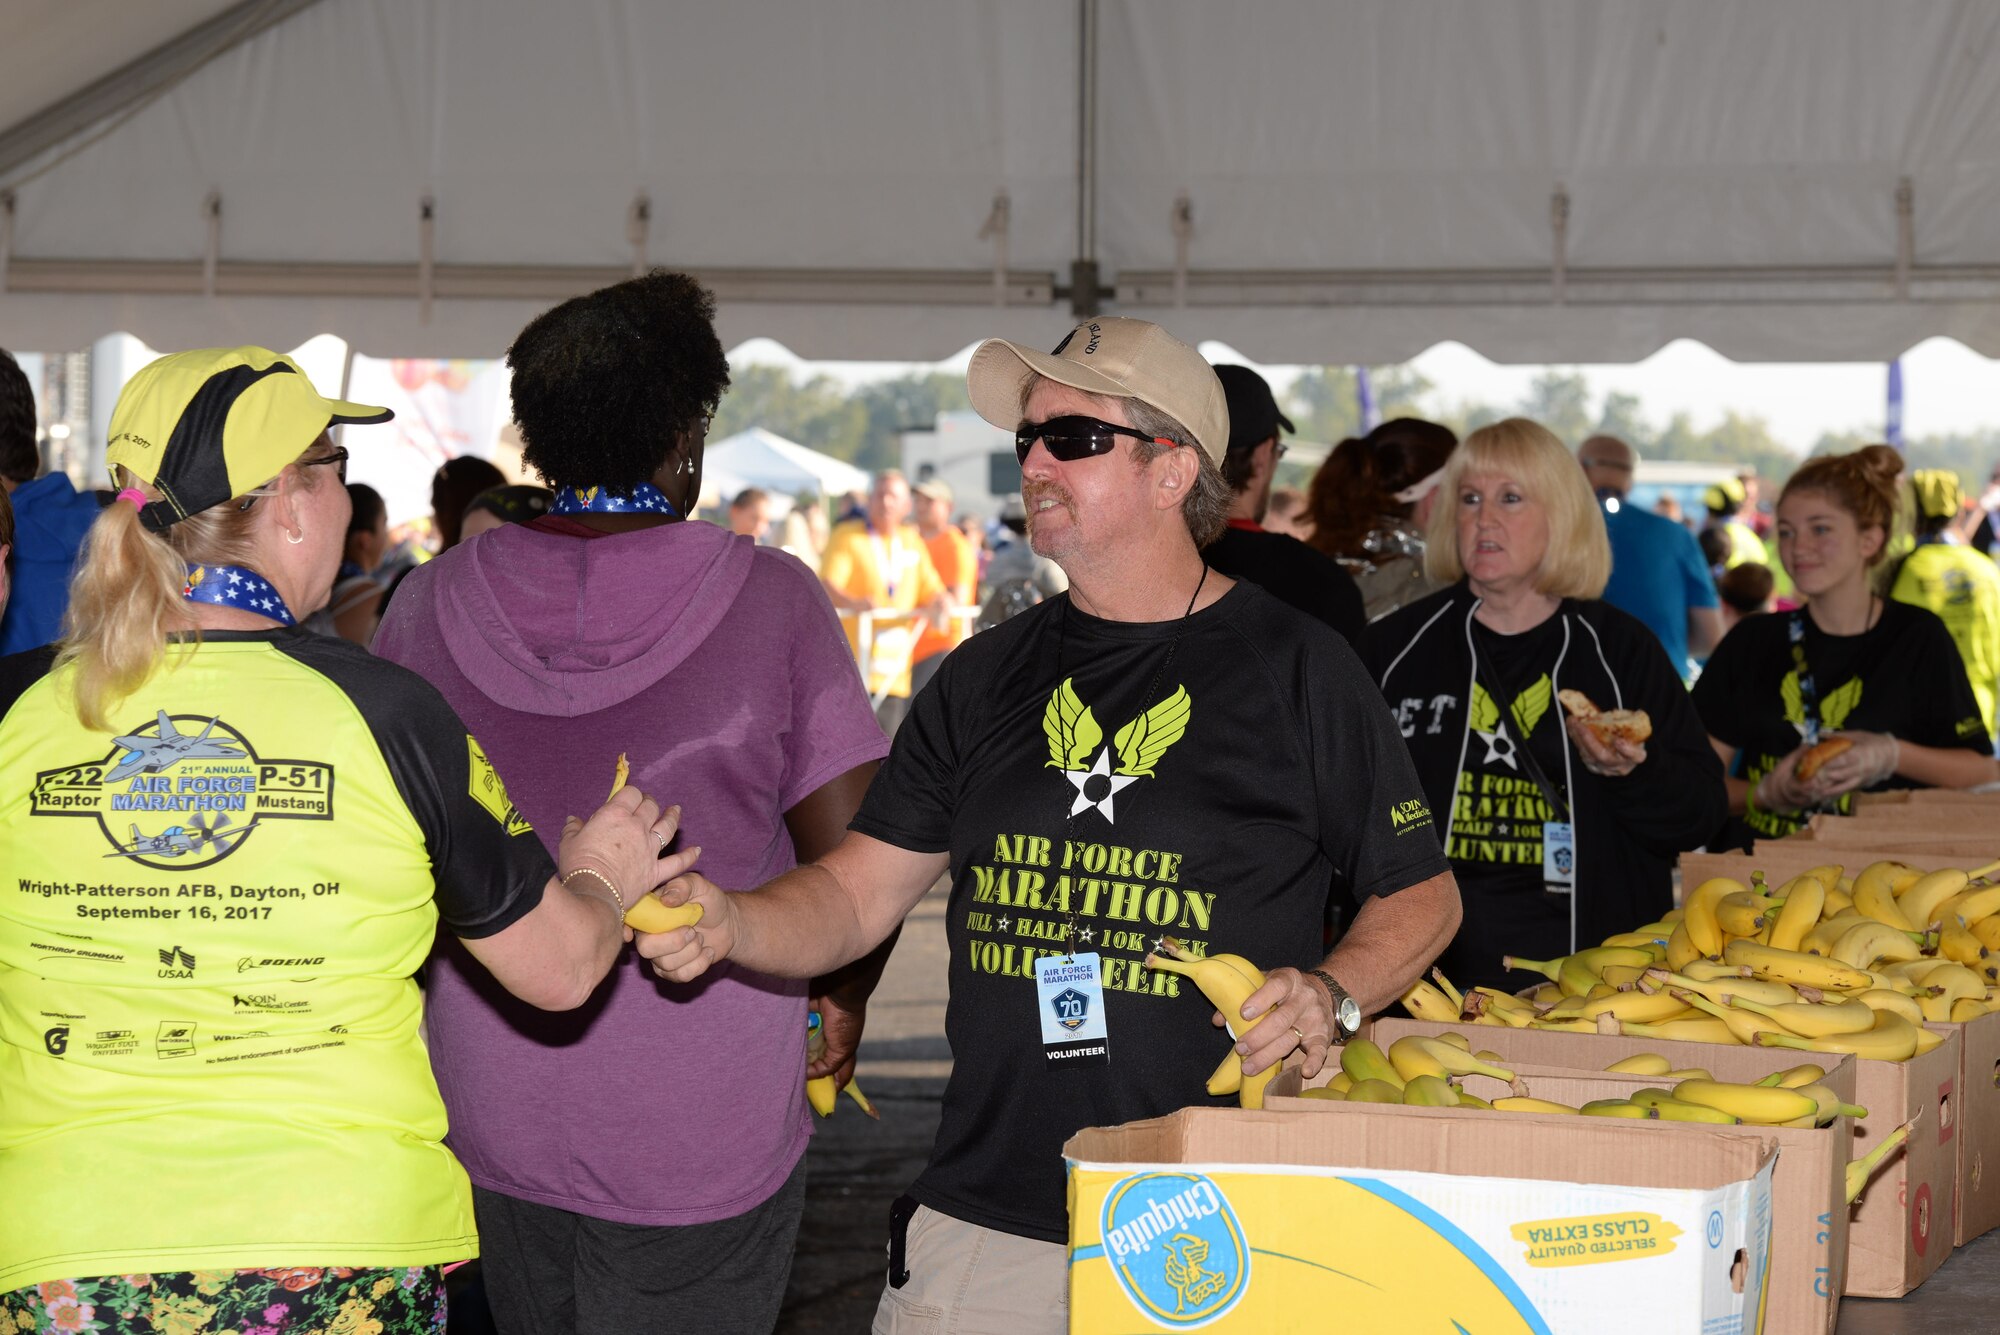 Air Force Marathon volunteers hand out bananas to runners after the finish line Sept. 16, 2017.